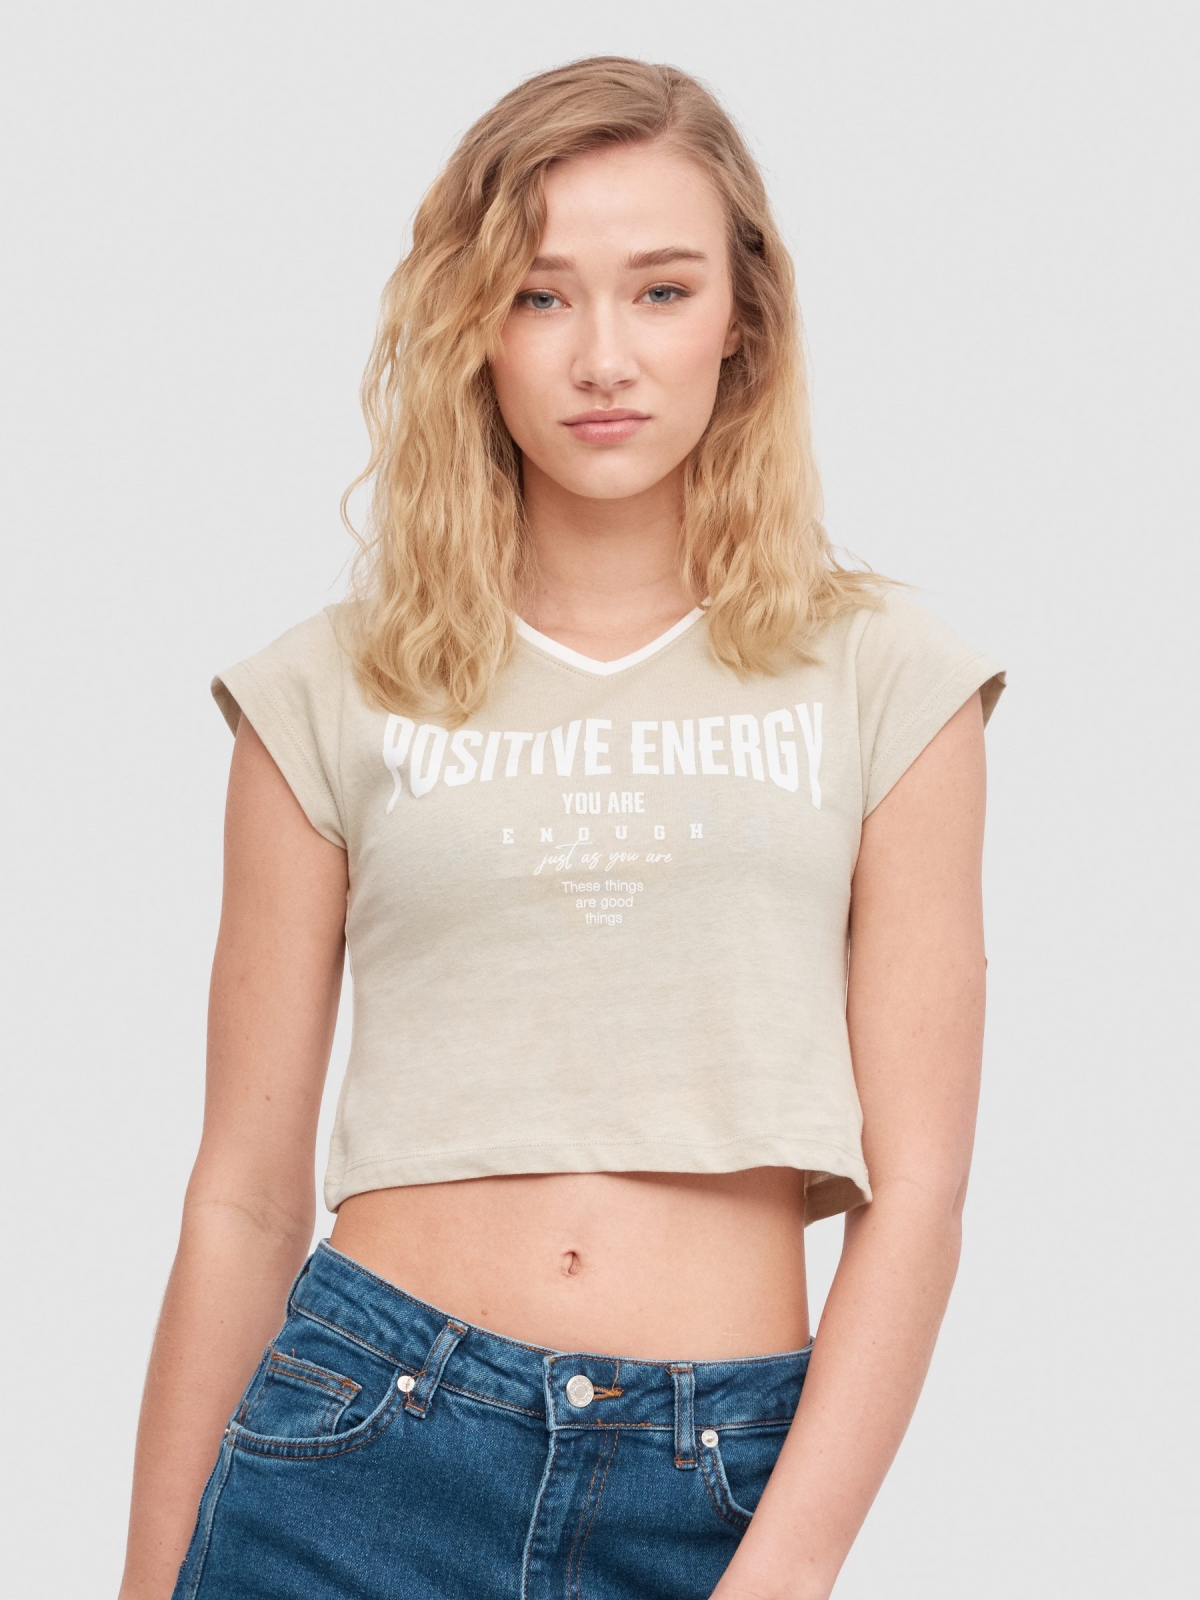 Positive Energy t-shirt greyish green middle front view